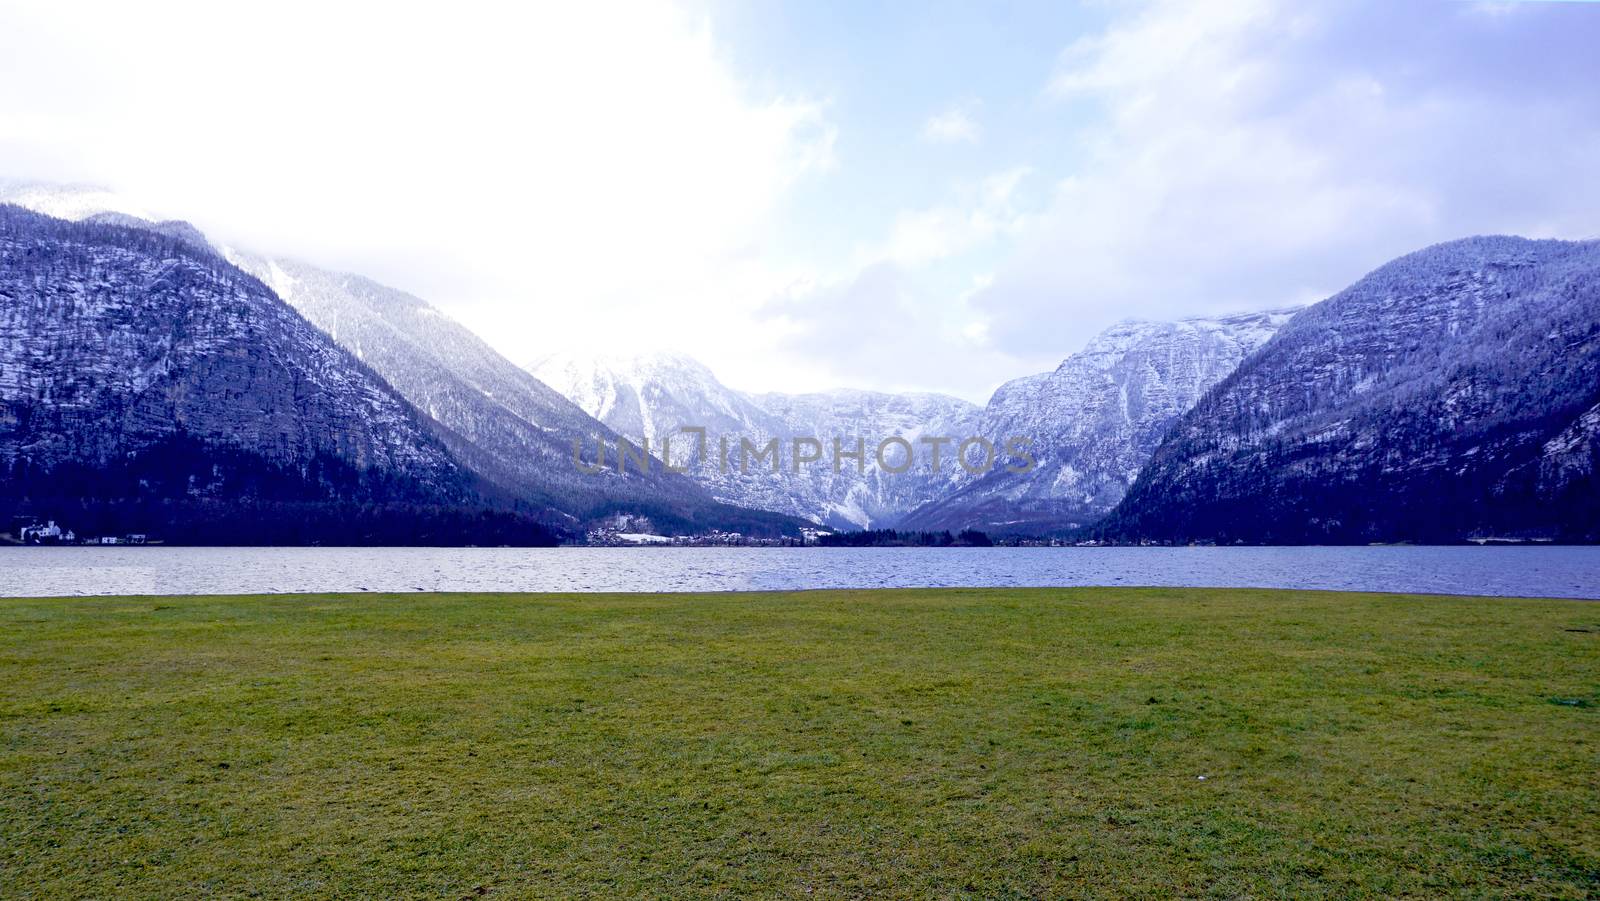 panorama of Hallstatt lake and green grass field outdoor dreamscape with snow mountain background in Austria in Austrian alps by polarbearstudio